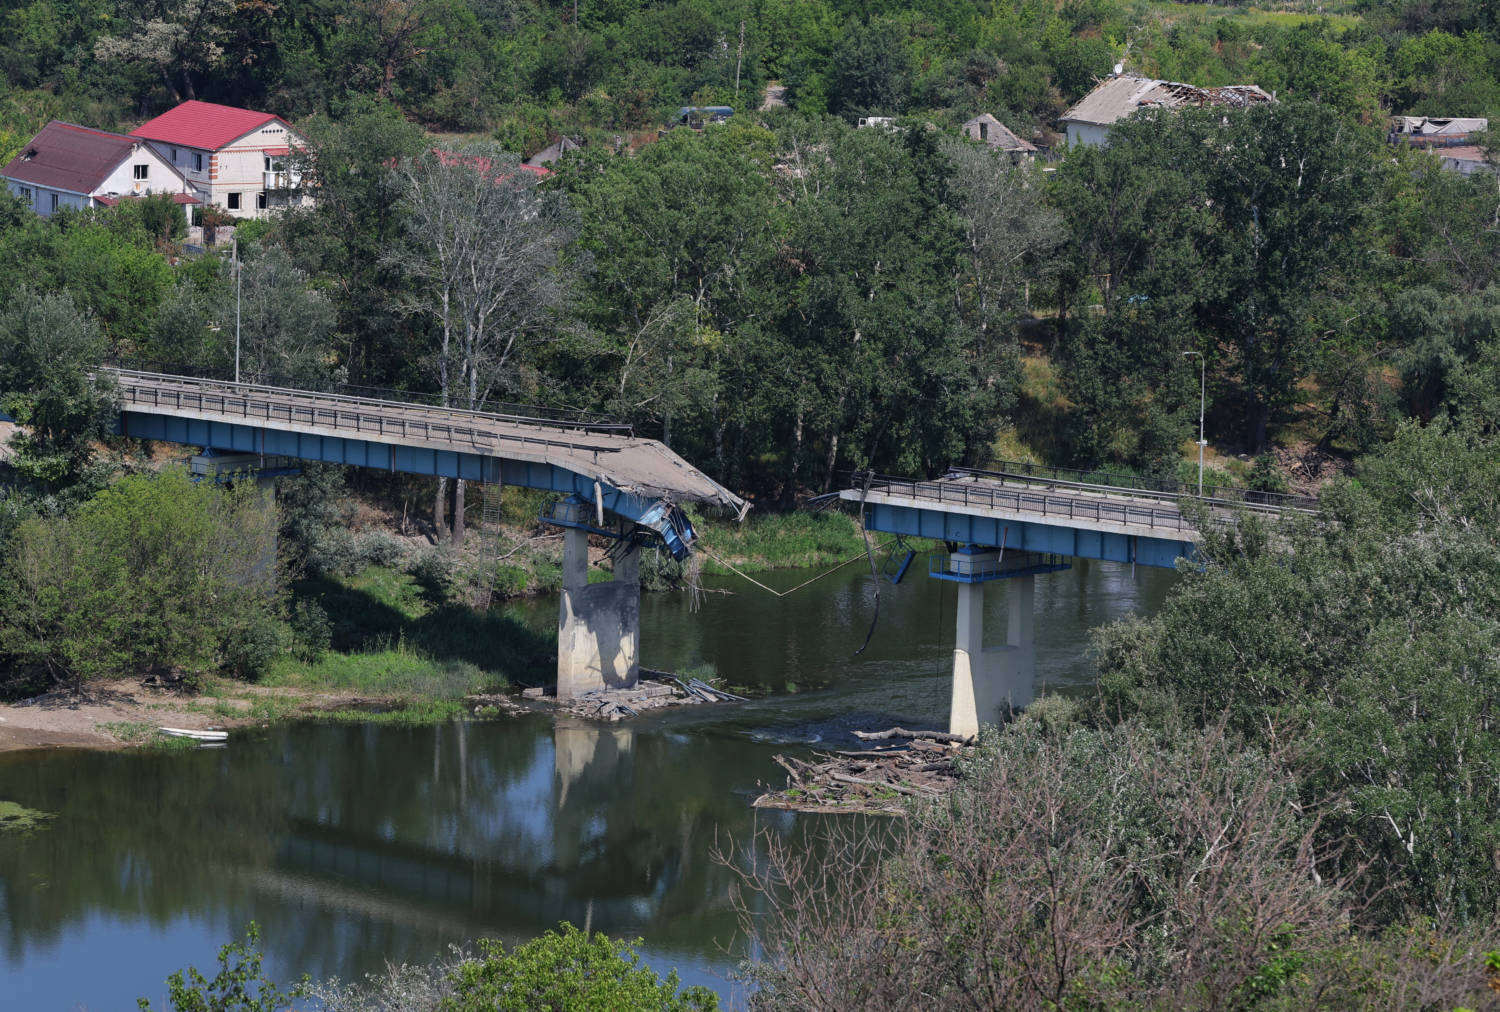 A View Of The Destroyed Bridge Linking Sievierodonetsk With Lysychansk, As Seen From Lysychansk